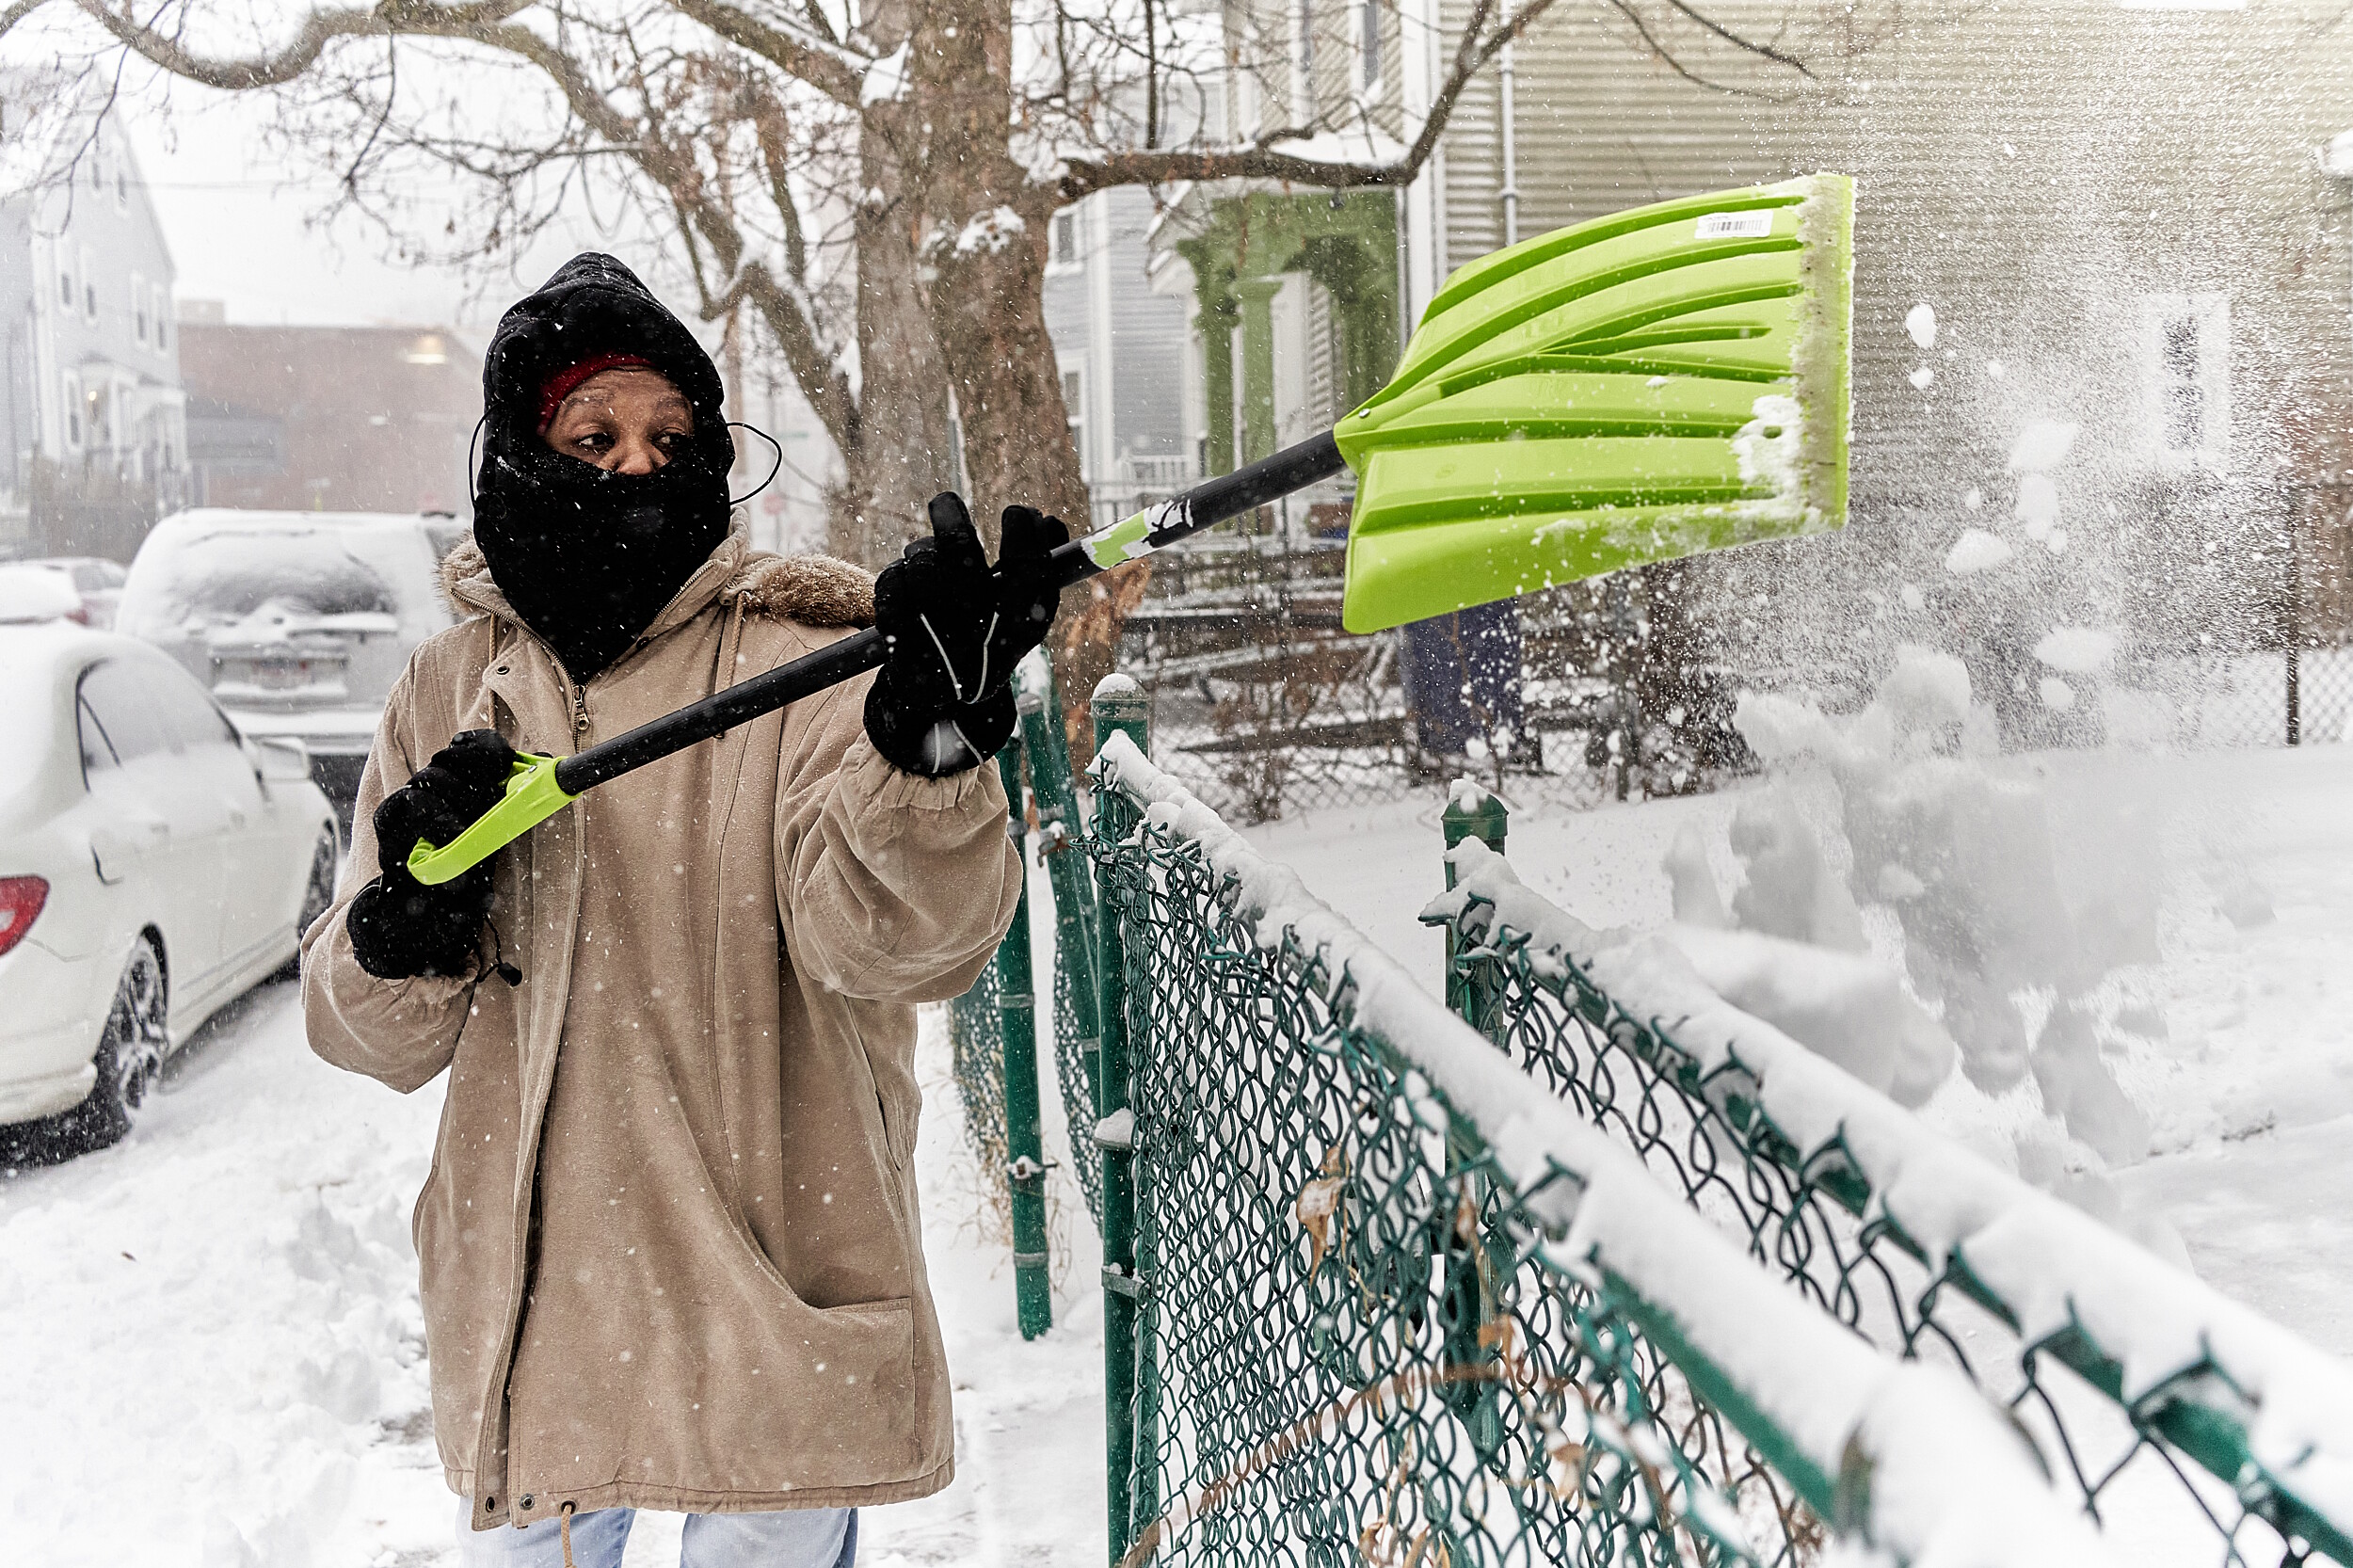 JoAnn Butler, 71, shovels the snow in front of her home.